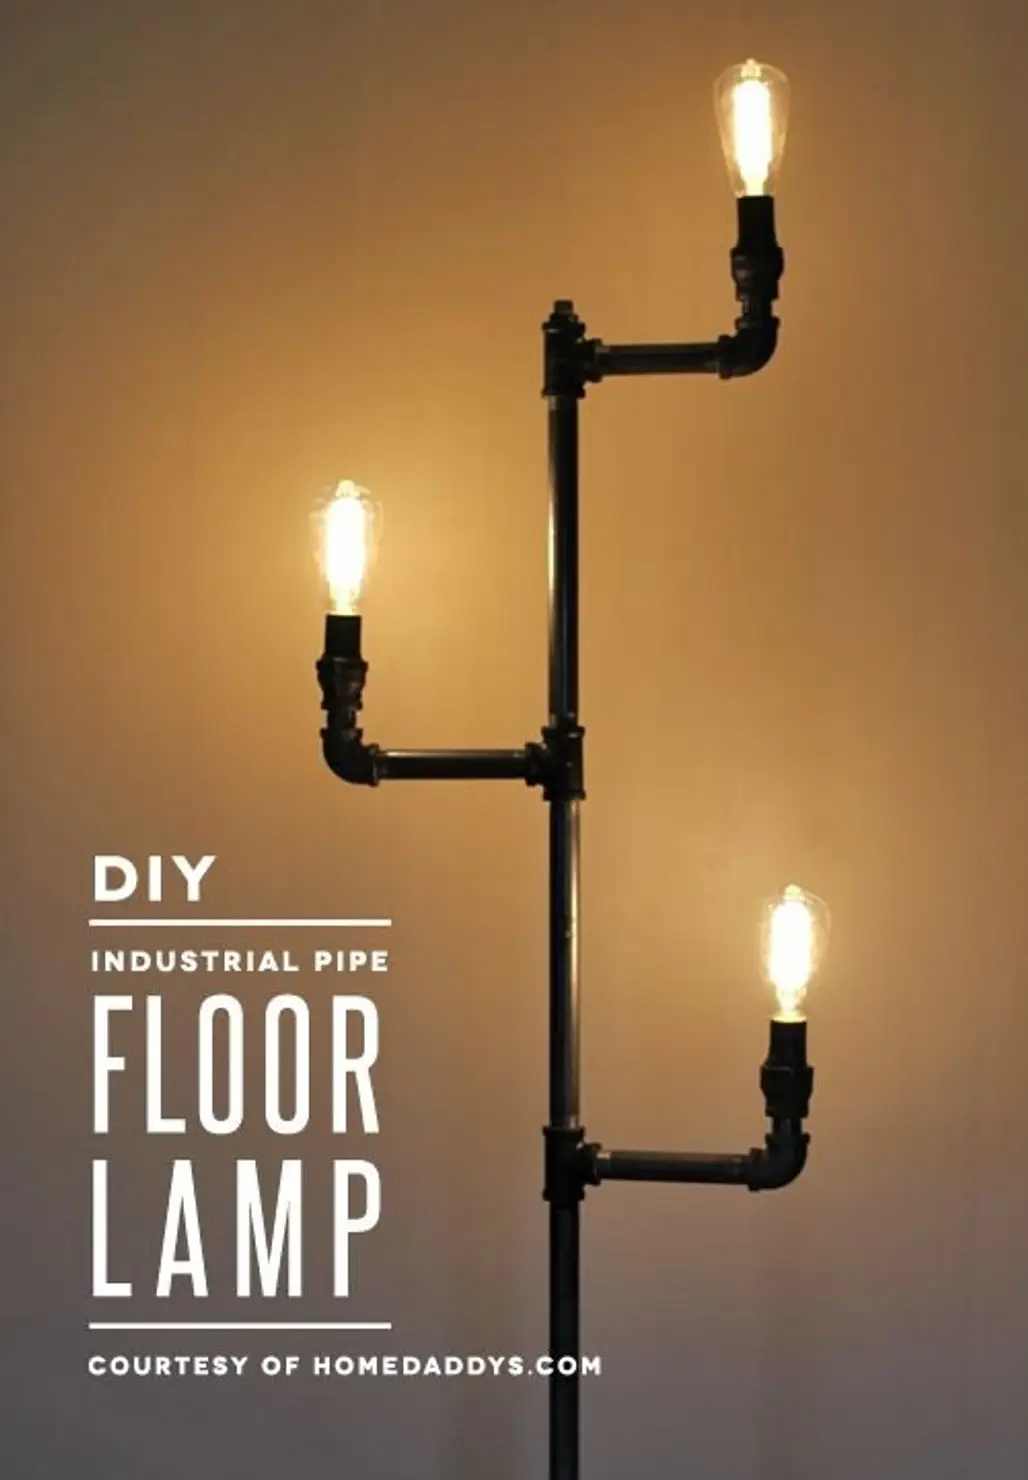 How to Make an Industrial Pipe Floor Lamp